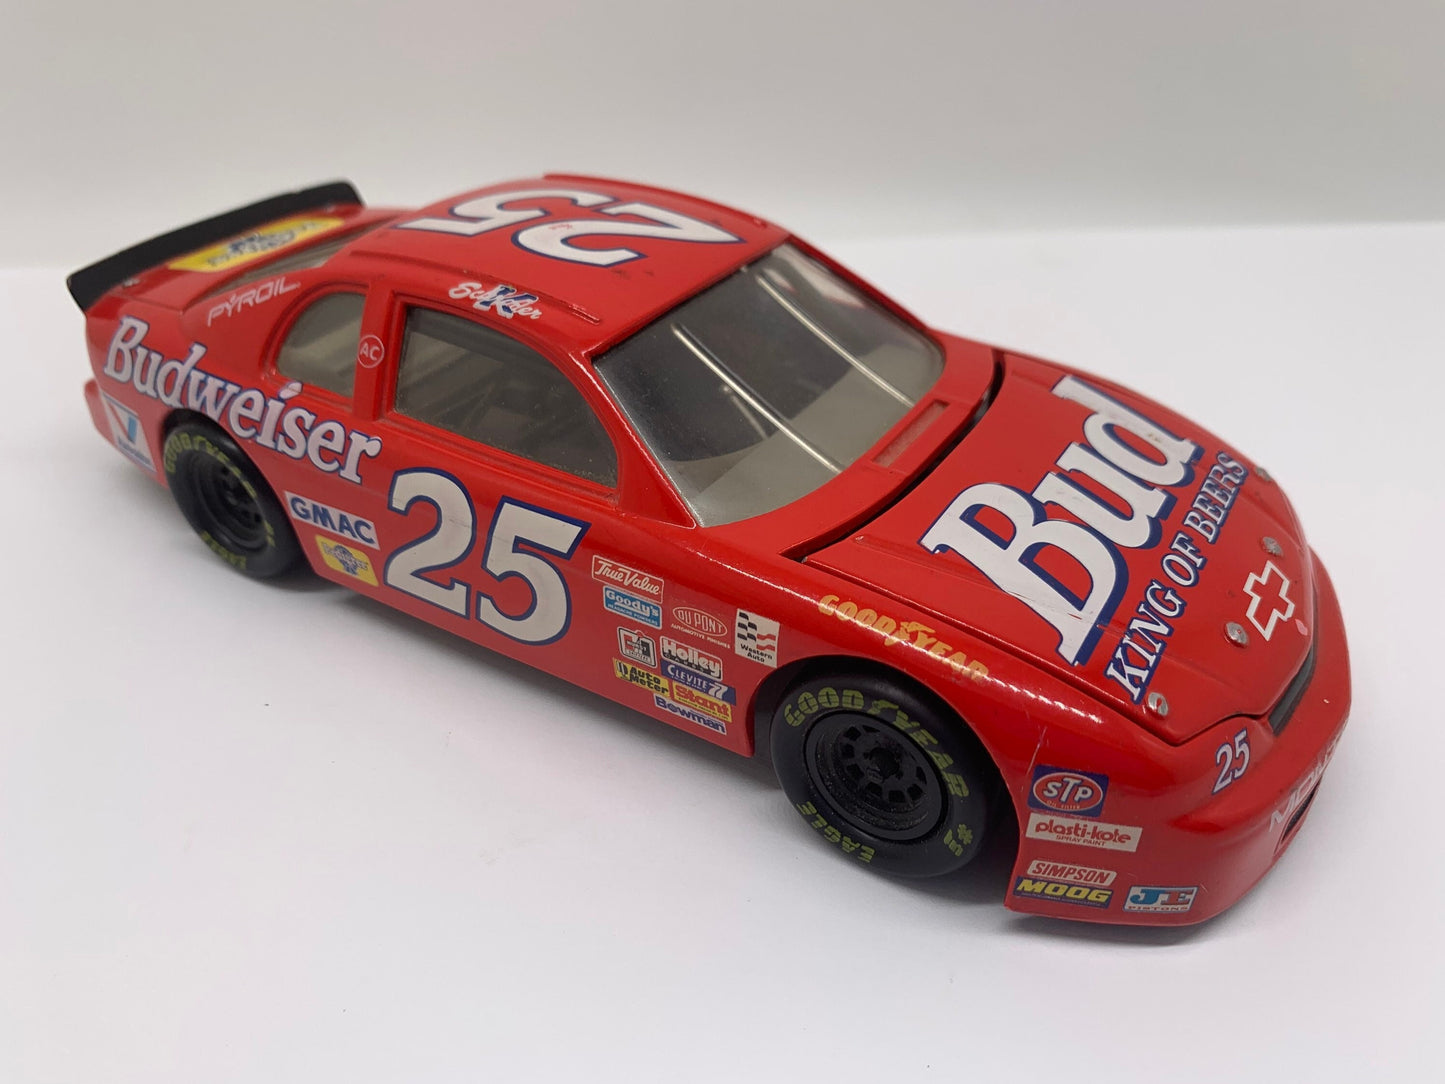 Revell Ricky Craven #25 Chevy Monte Carlo Red Budweiser Perfect Birthday Gift Collectable 1:24 Scale Model Toy Car Nascar Replica